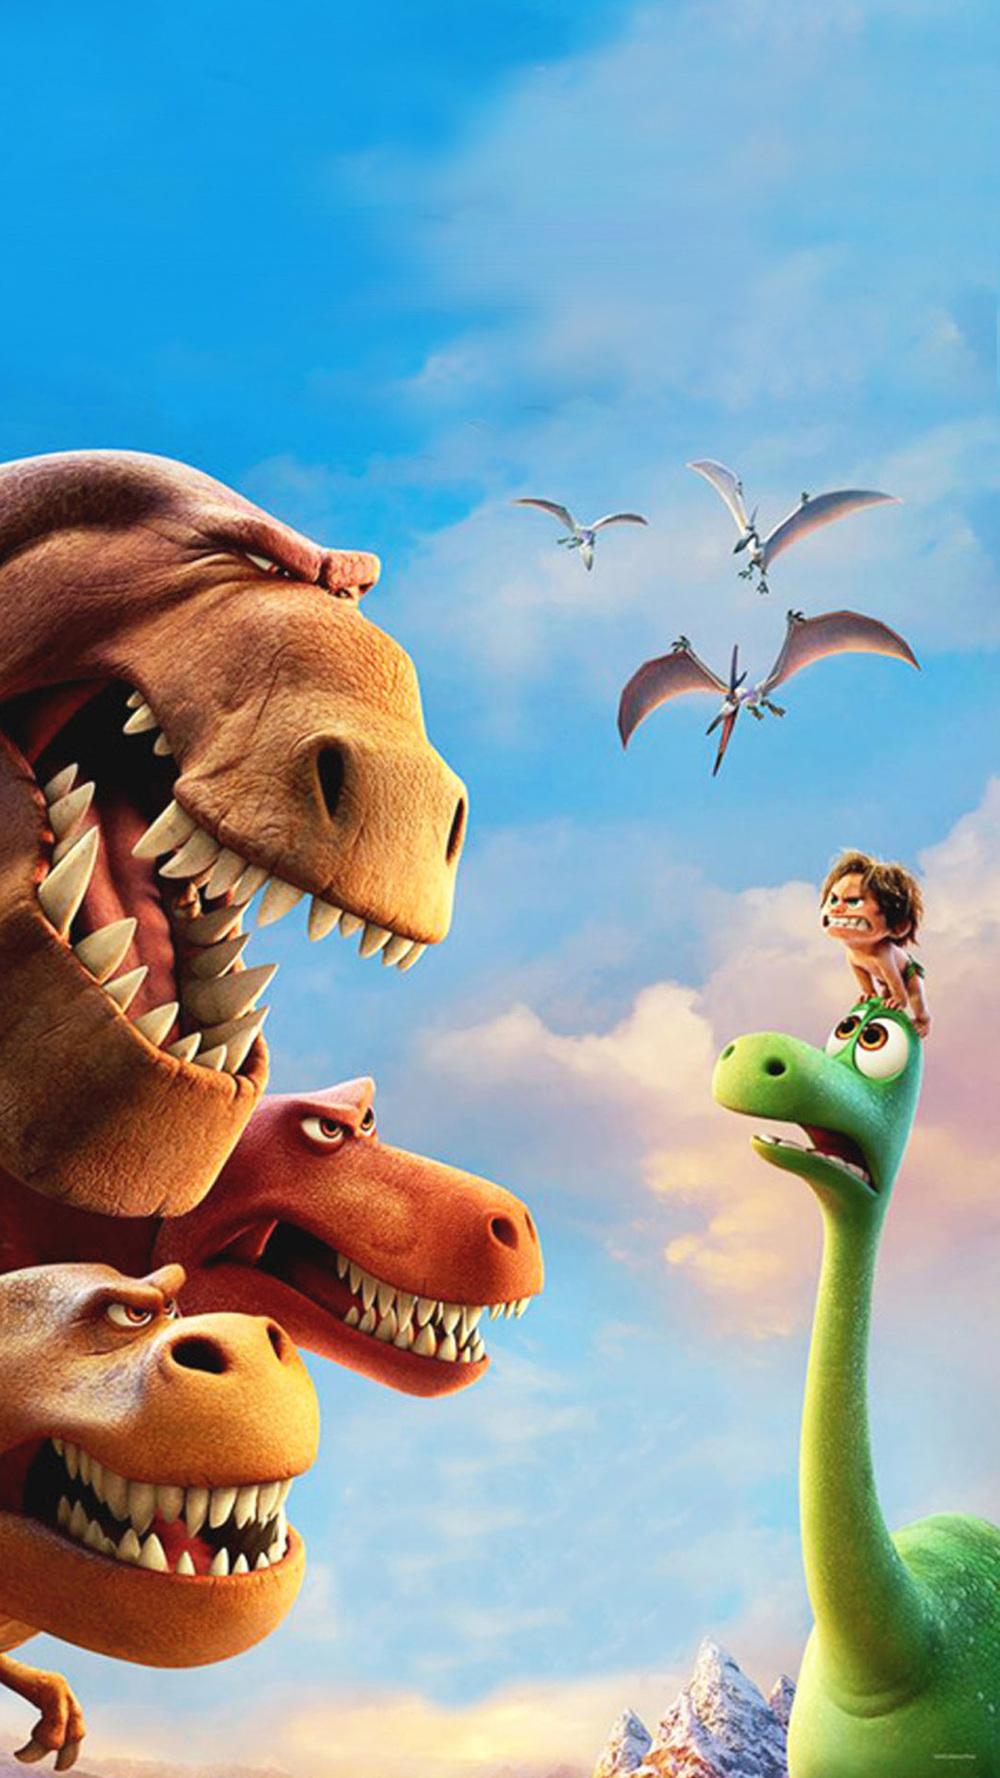 The Good Dinosaur: Downloadable Wallpaper for iOS & Android